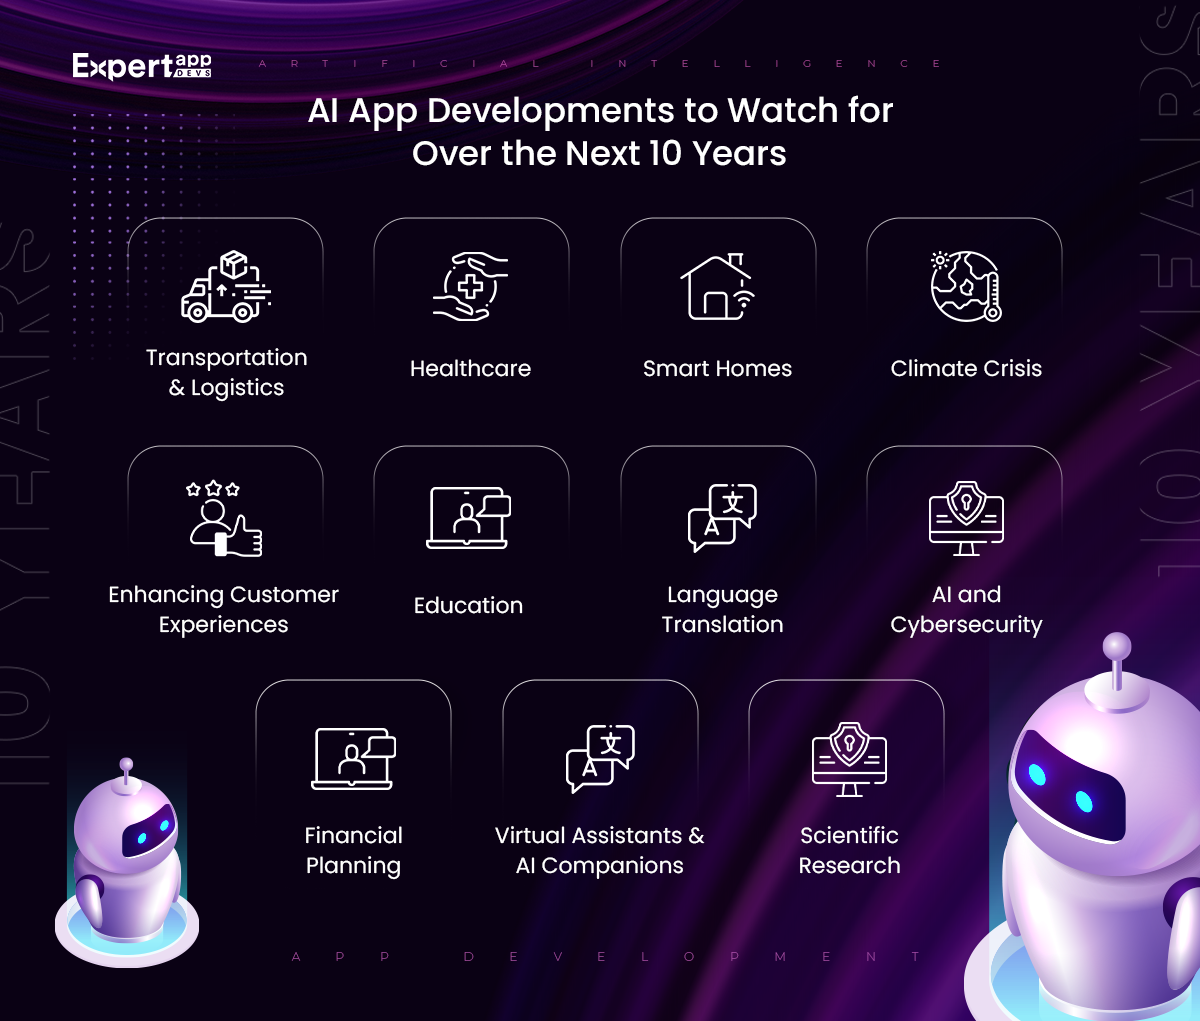 AI App Developments to Watch for in the Next 10 Years